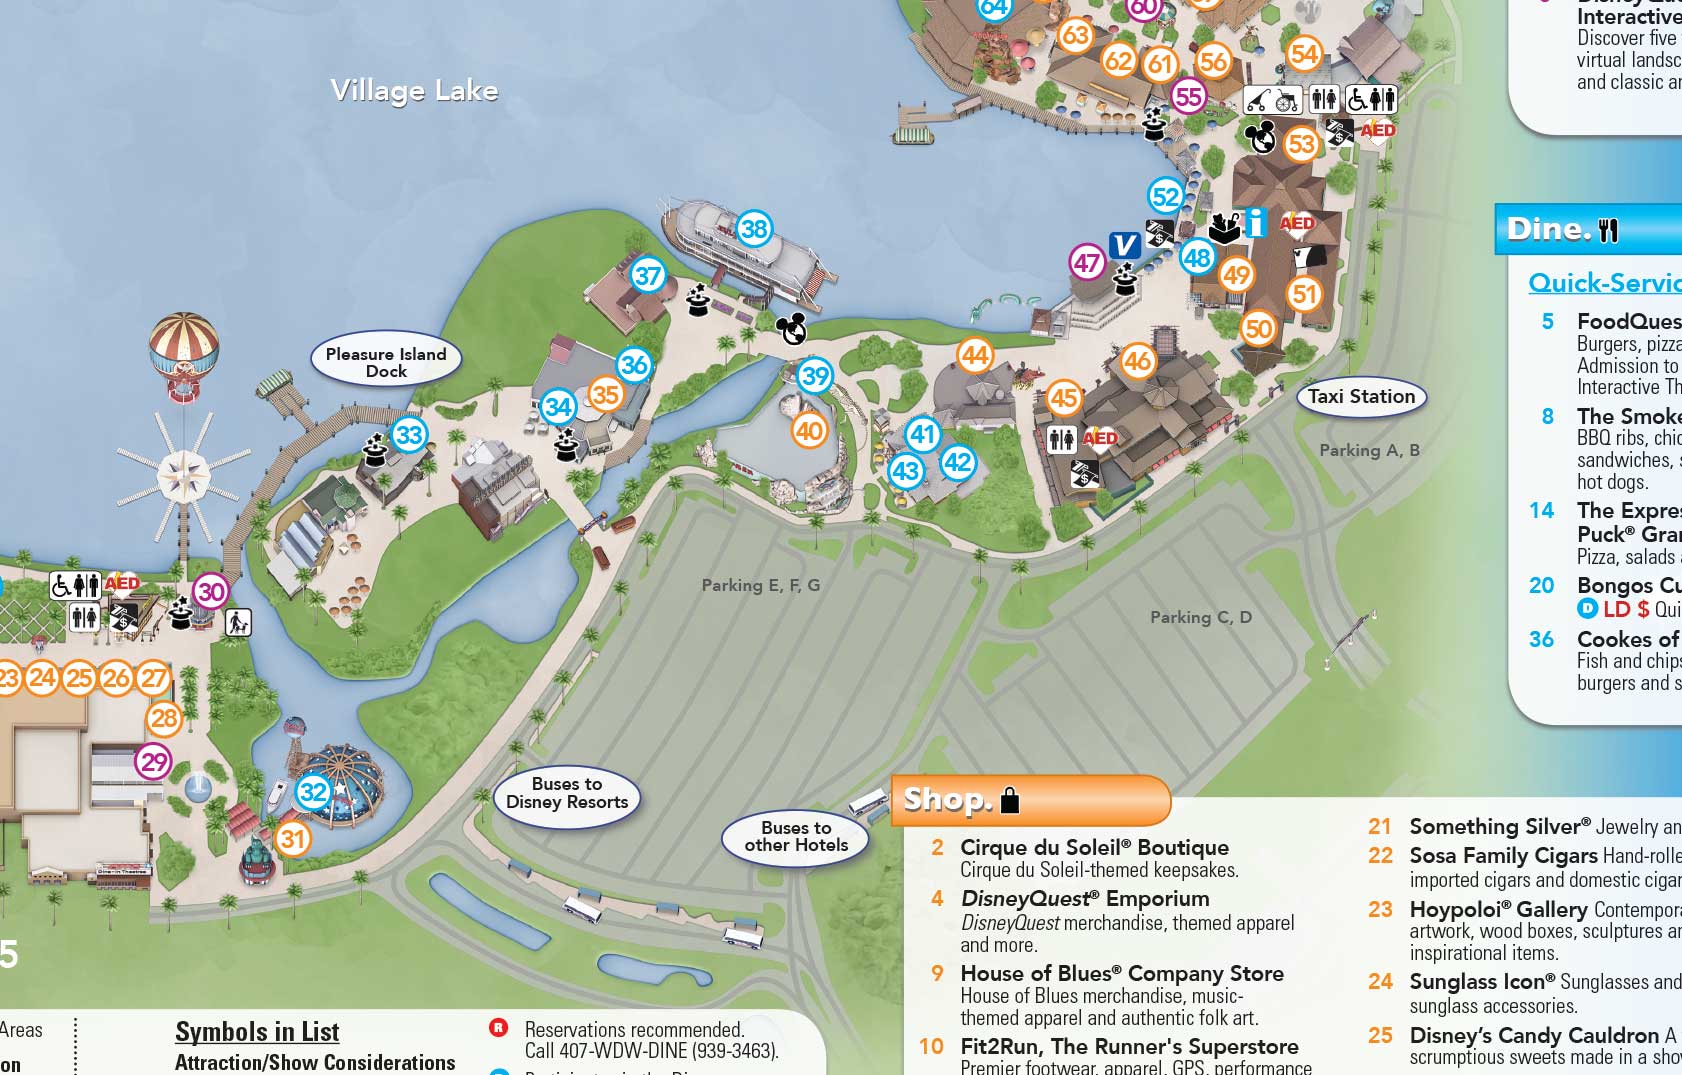 can you park at disney springs and take bus to magic kingdom